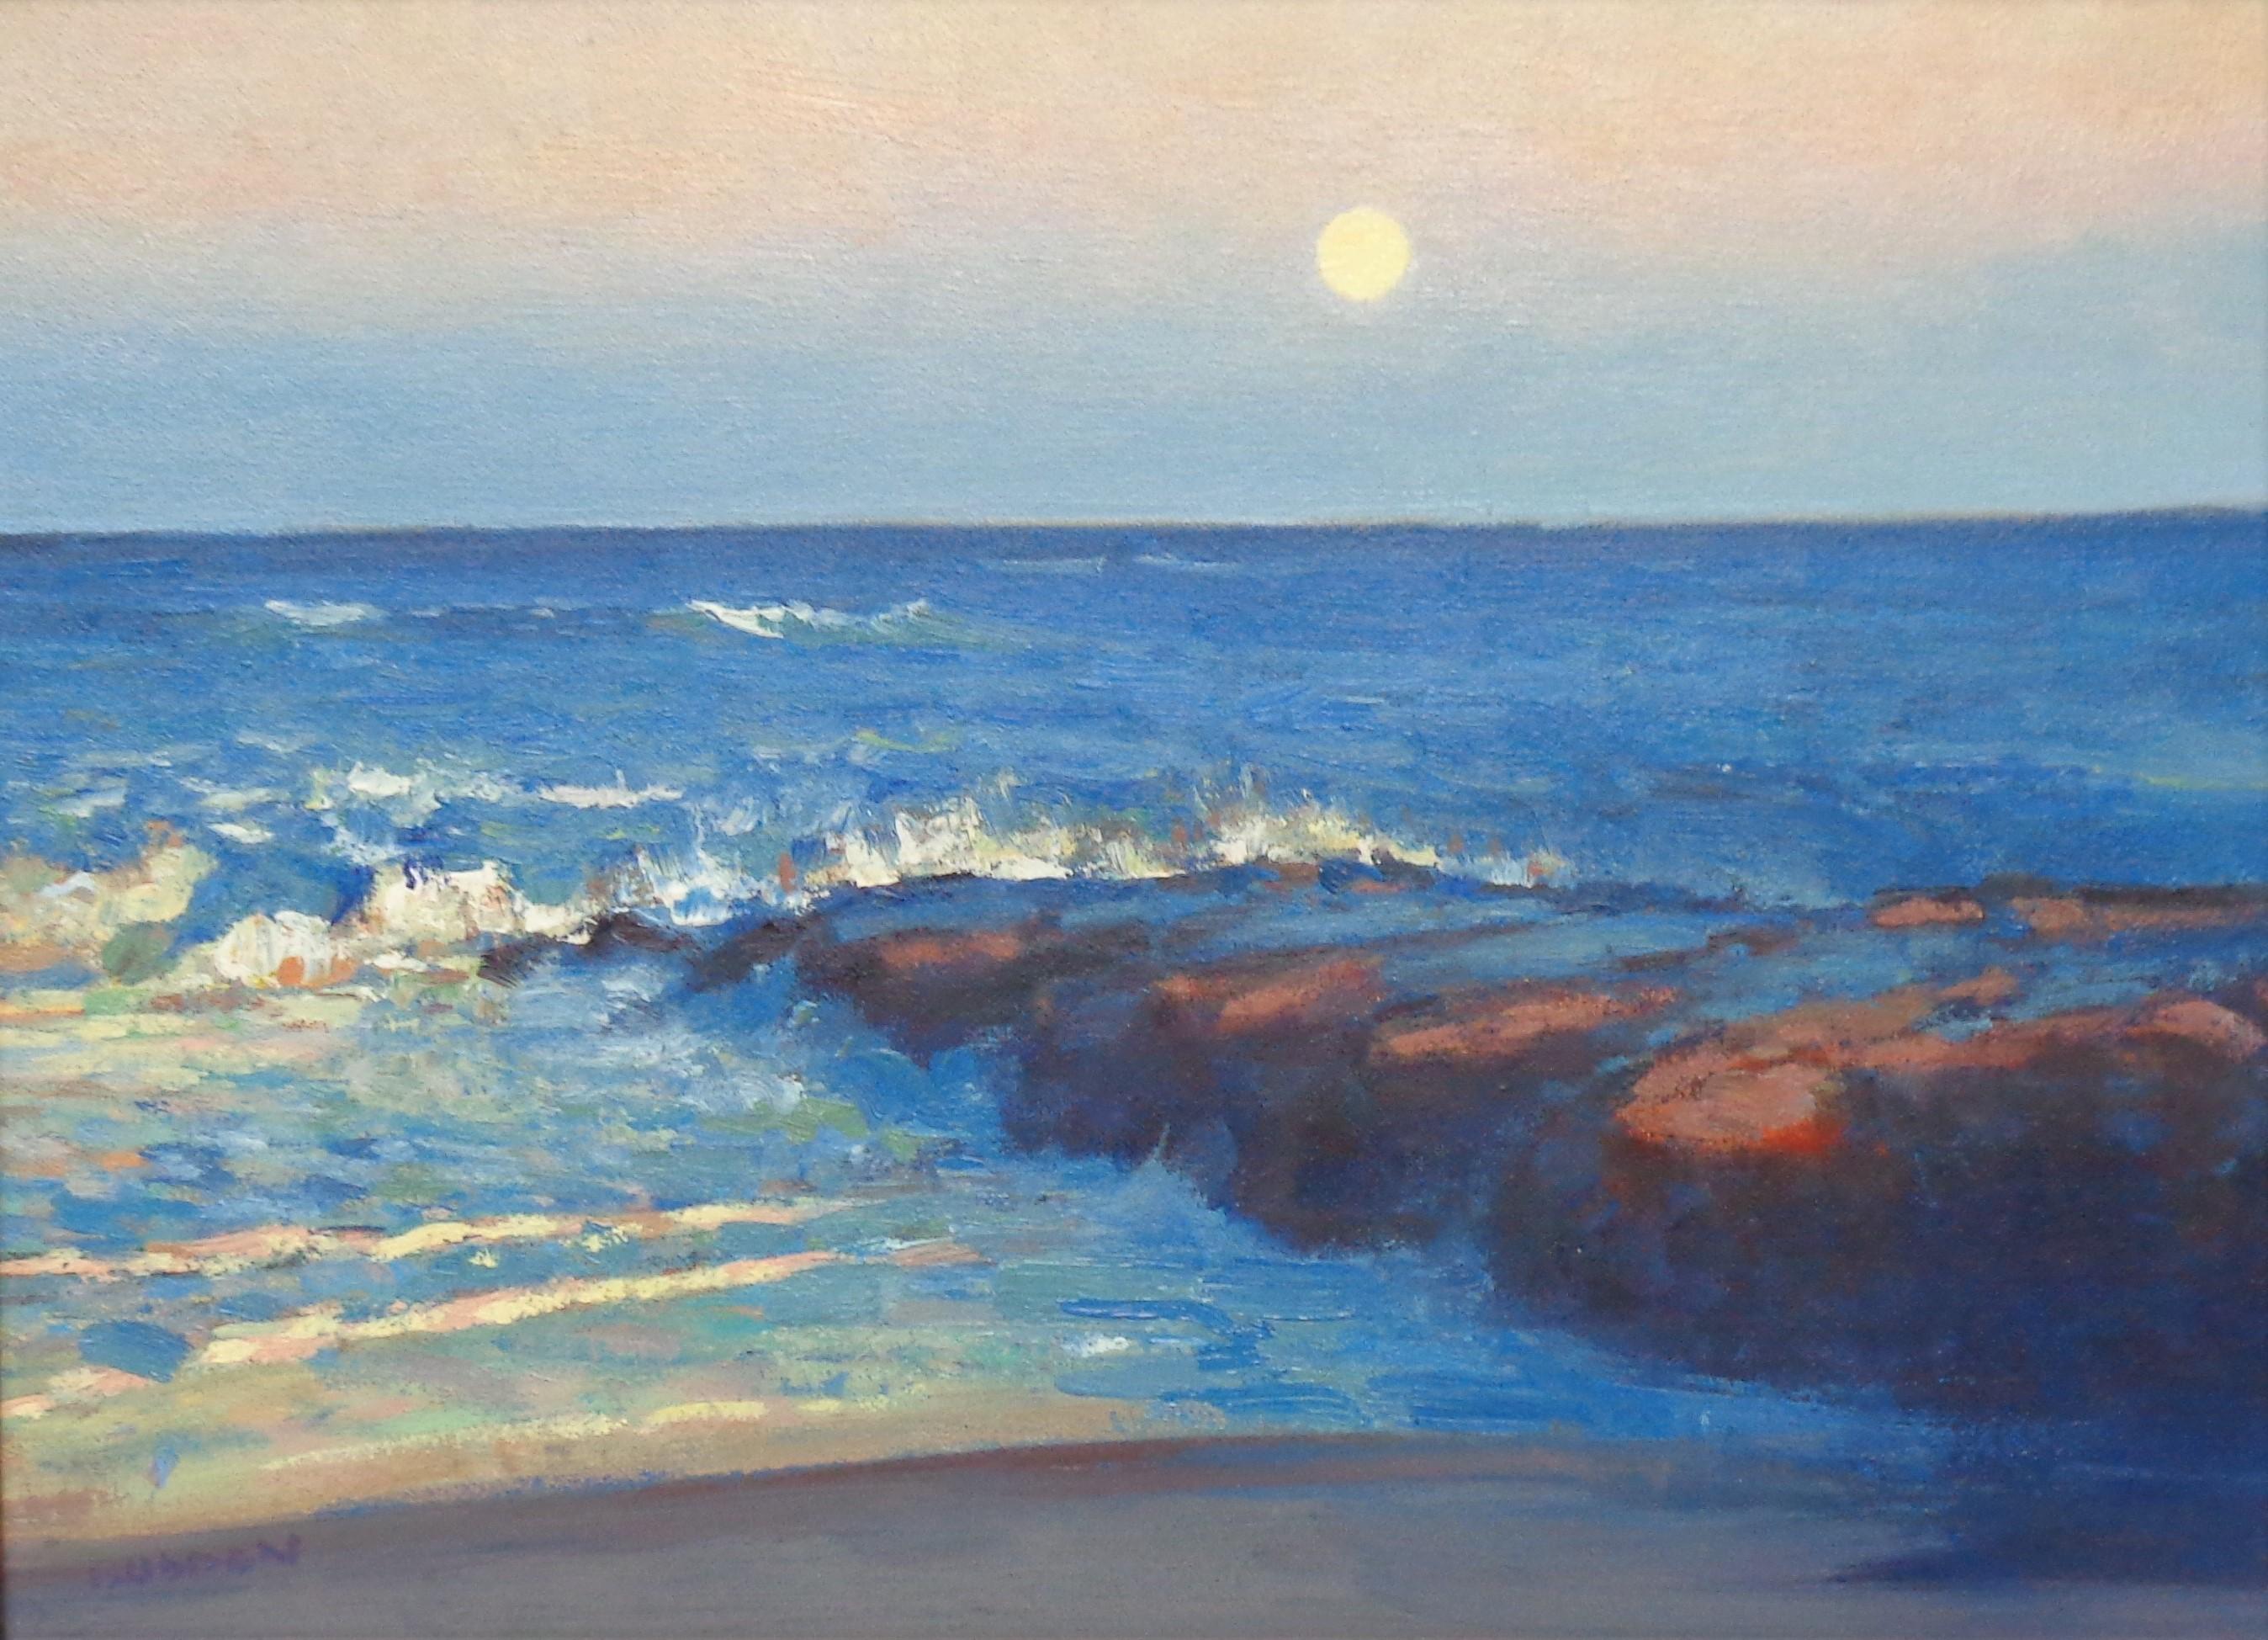  Impressionistic Moonlight Seascape Oil Painting Michael Budden Beach Jetty For Sale 1